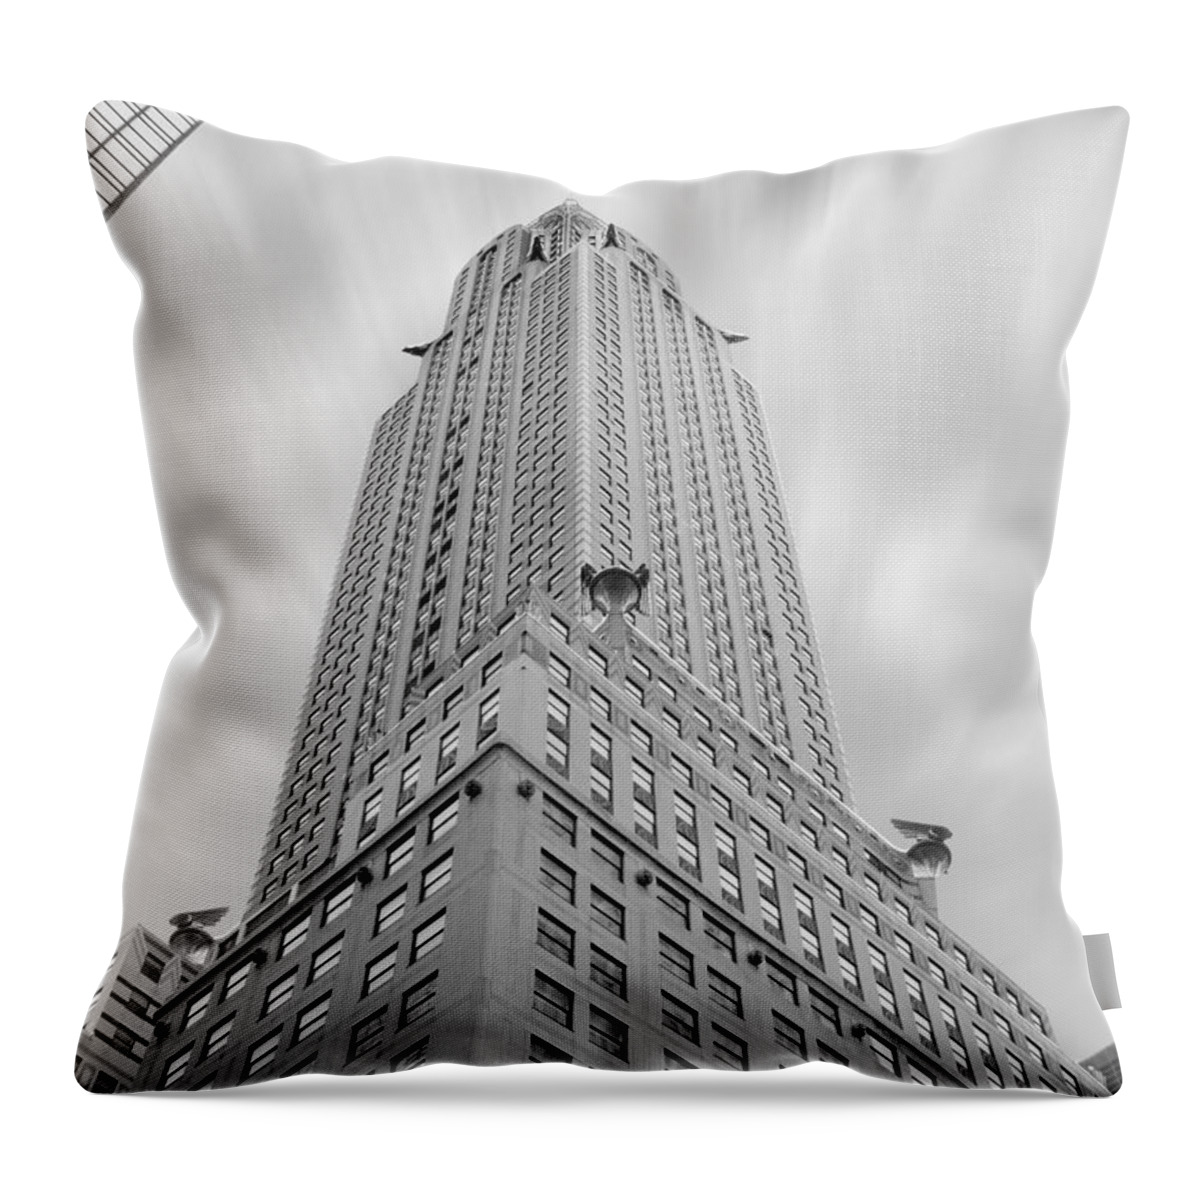 Landmarks Throw Pillow featuring the photograph The Chrysler Building by Mike McGlothlen